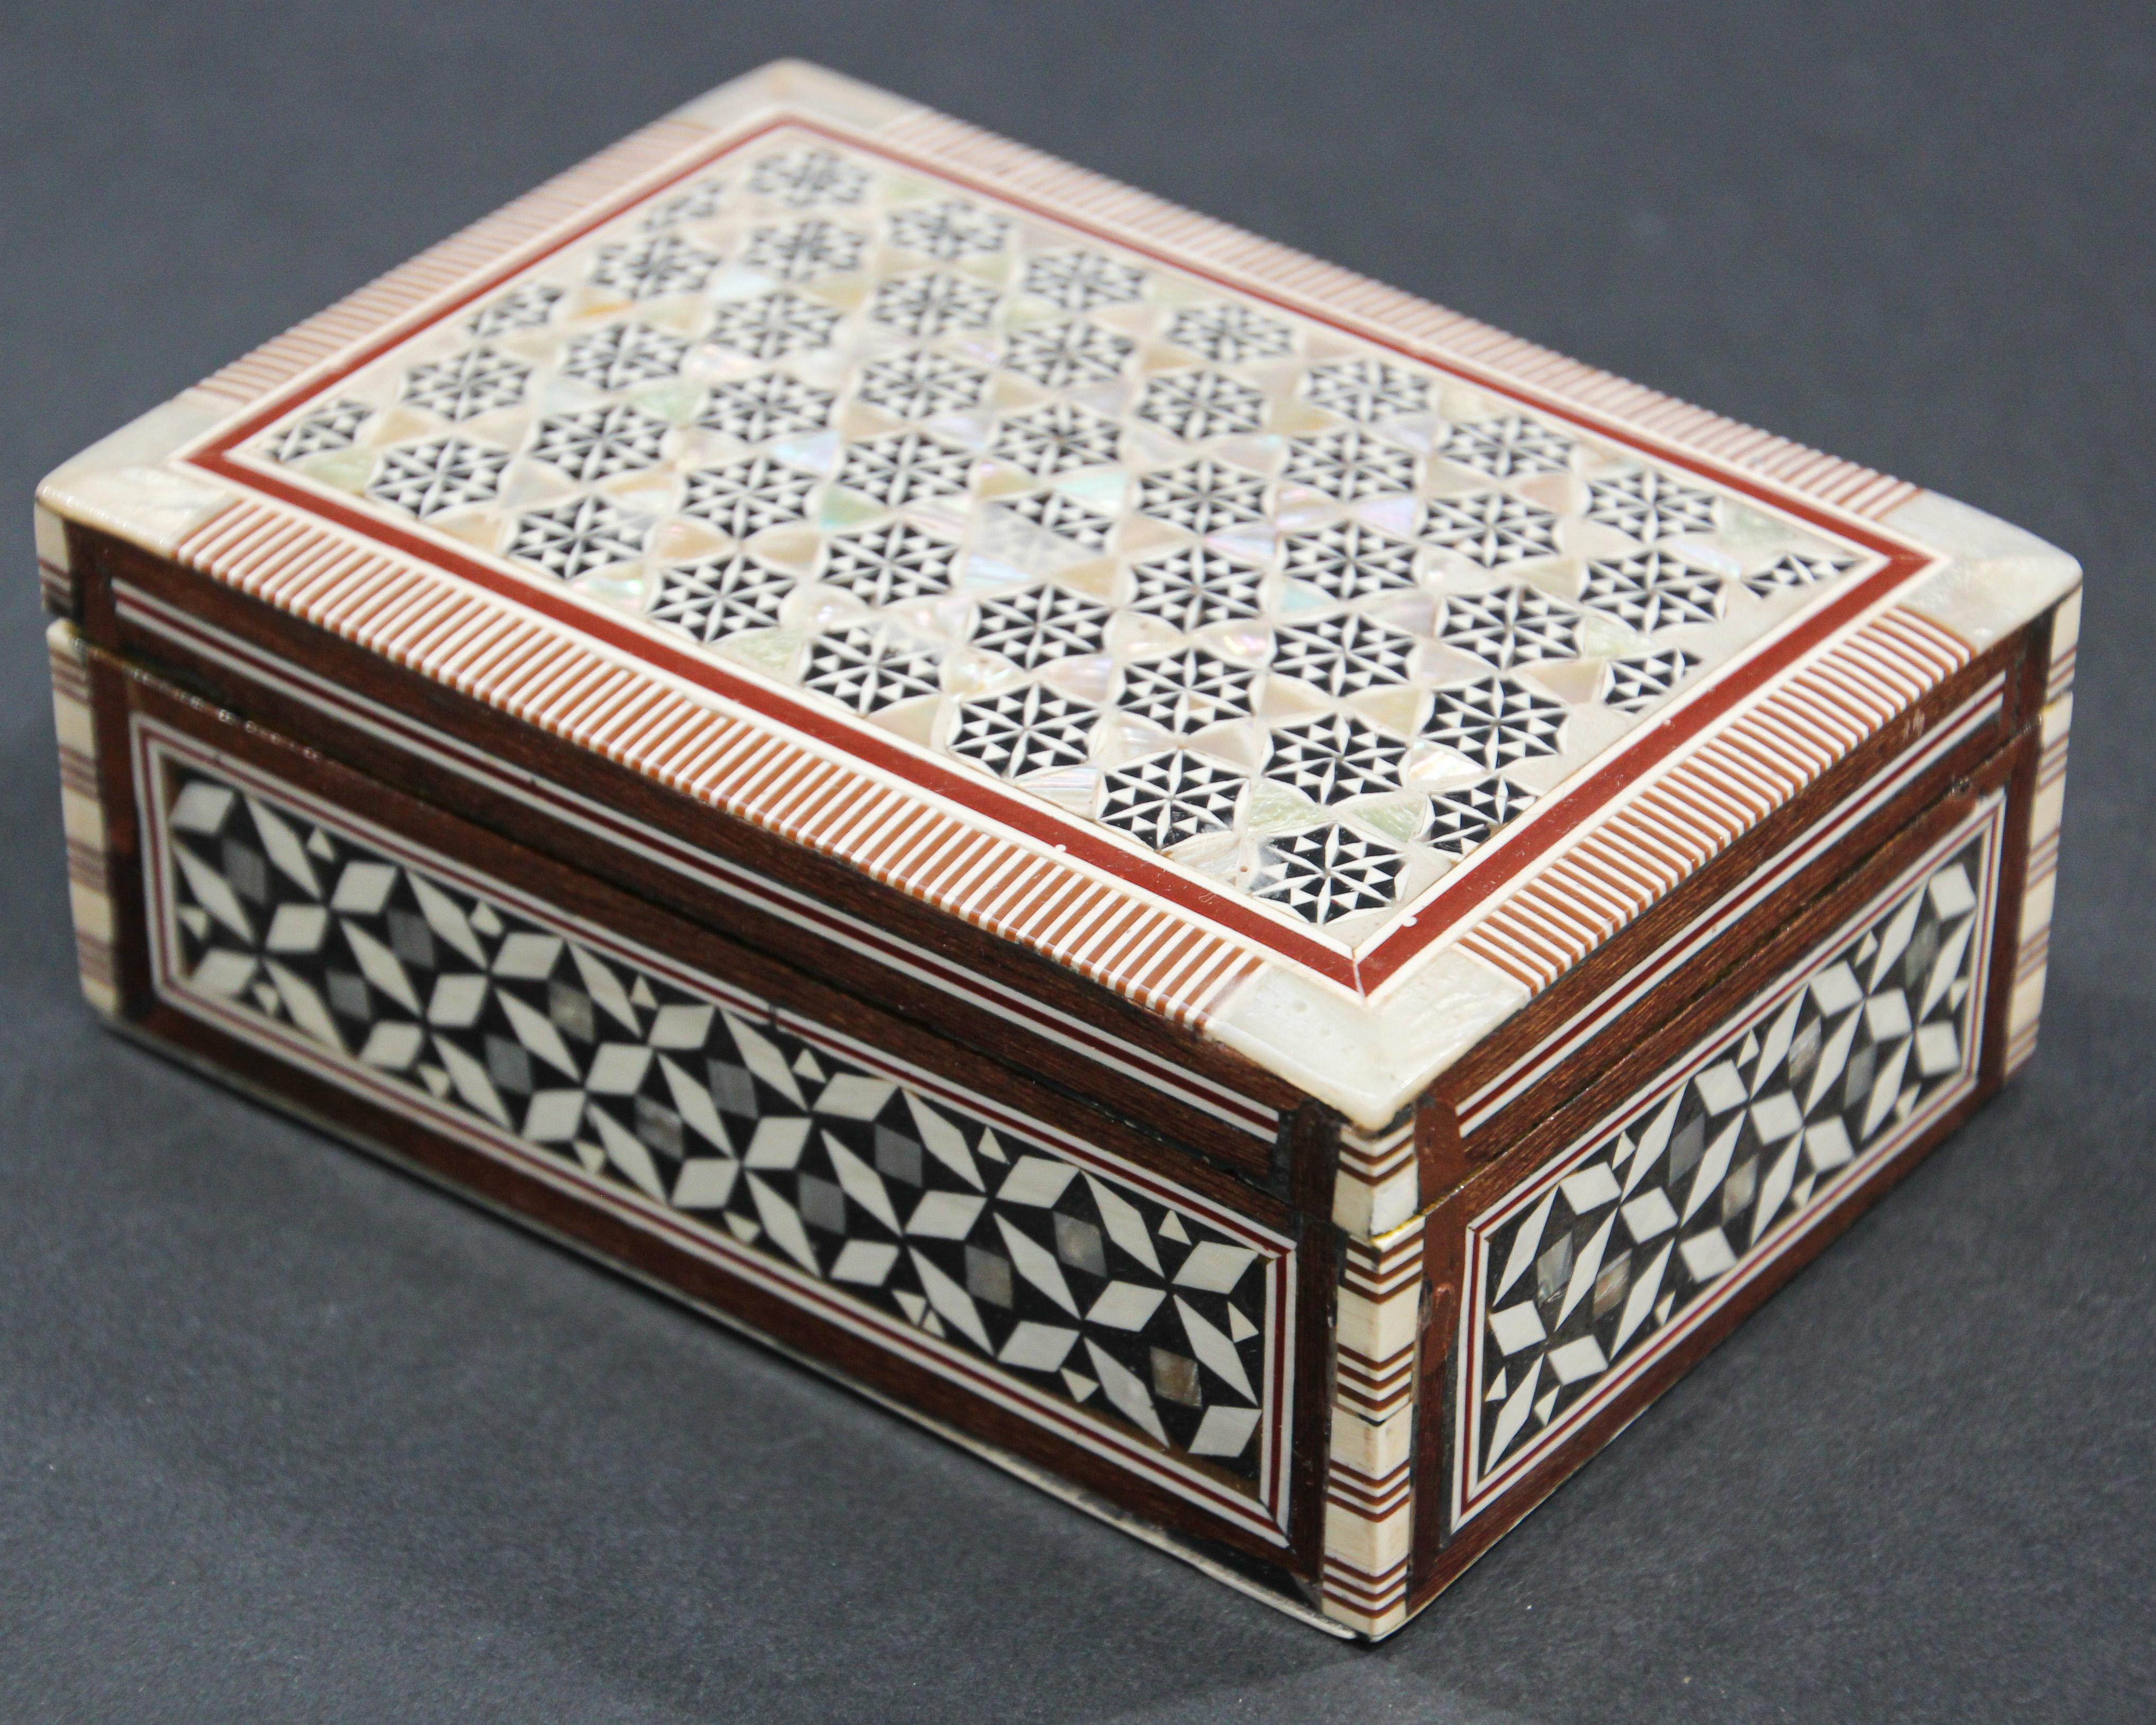 Exquisite handcrafted Middle Eastern Lebanese mosaic marquetry wood box.
Small vintage walnut Syrian style box intricately decorated with Moorish motif designs which have been painstakingly inlaid with mosaic marquetry.
Great craftsmanship